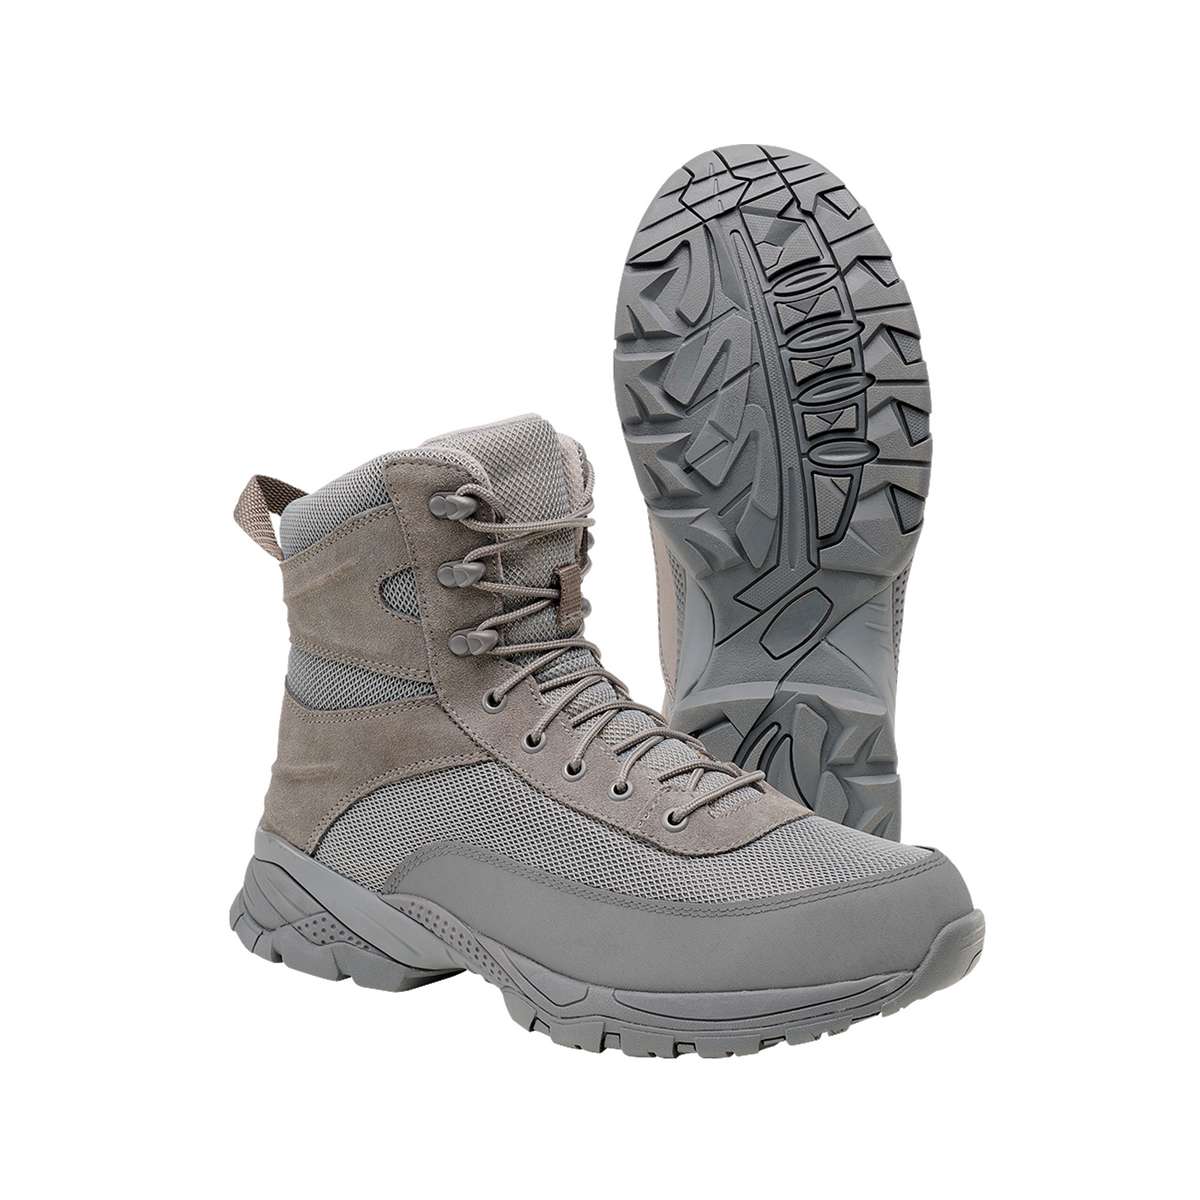 TACTICAL BOOT NEXT GENERATION BD9047 ANTHRACITE